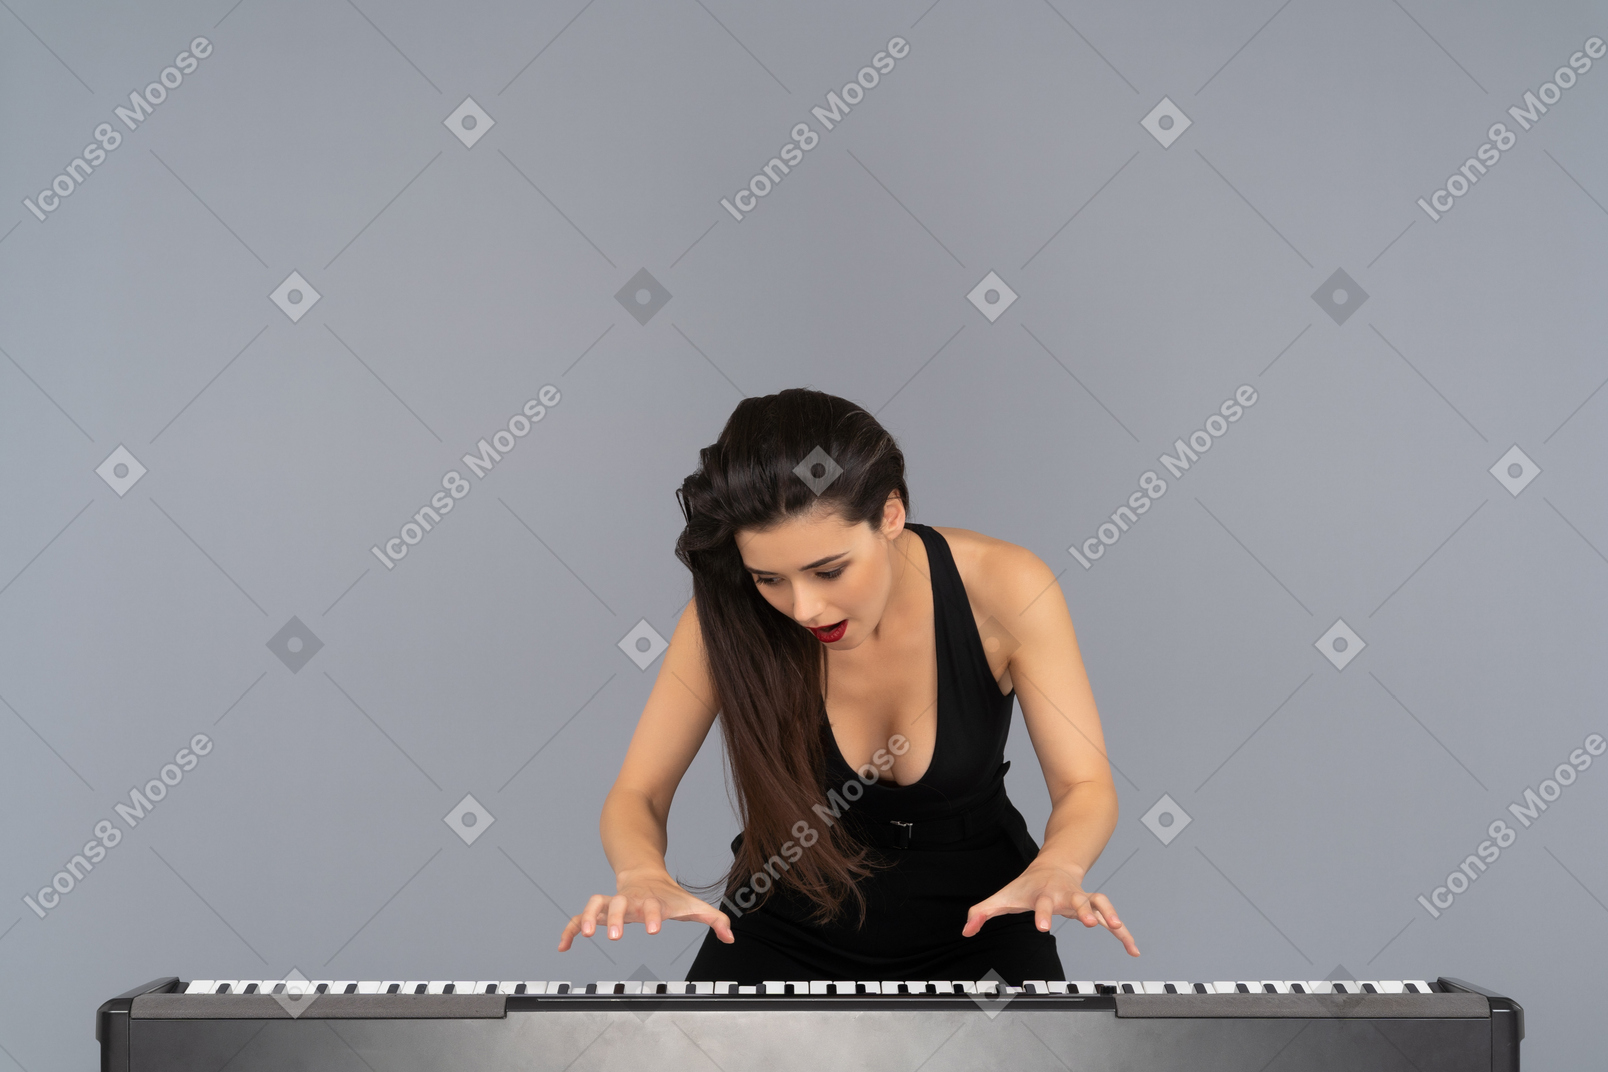 Beautiful female pianist getting ready to play